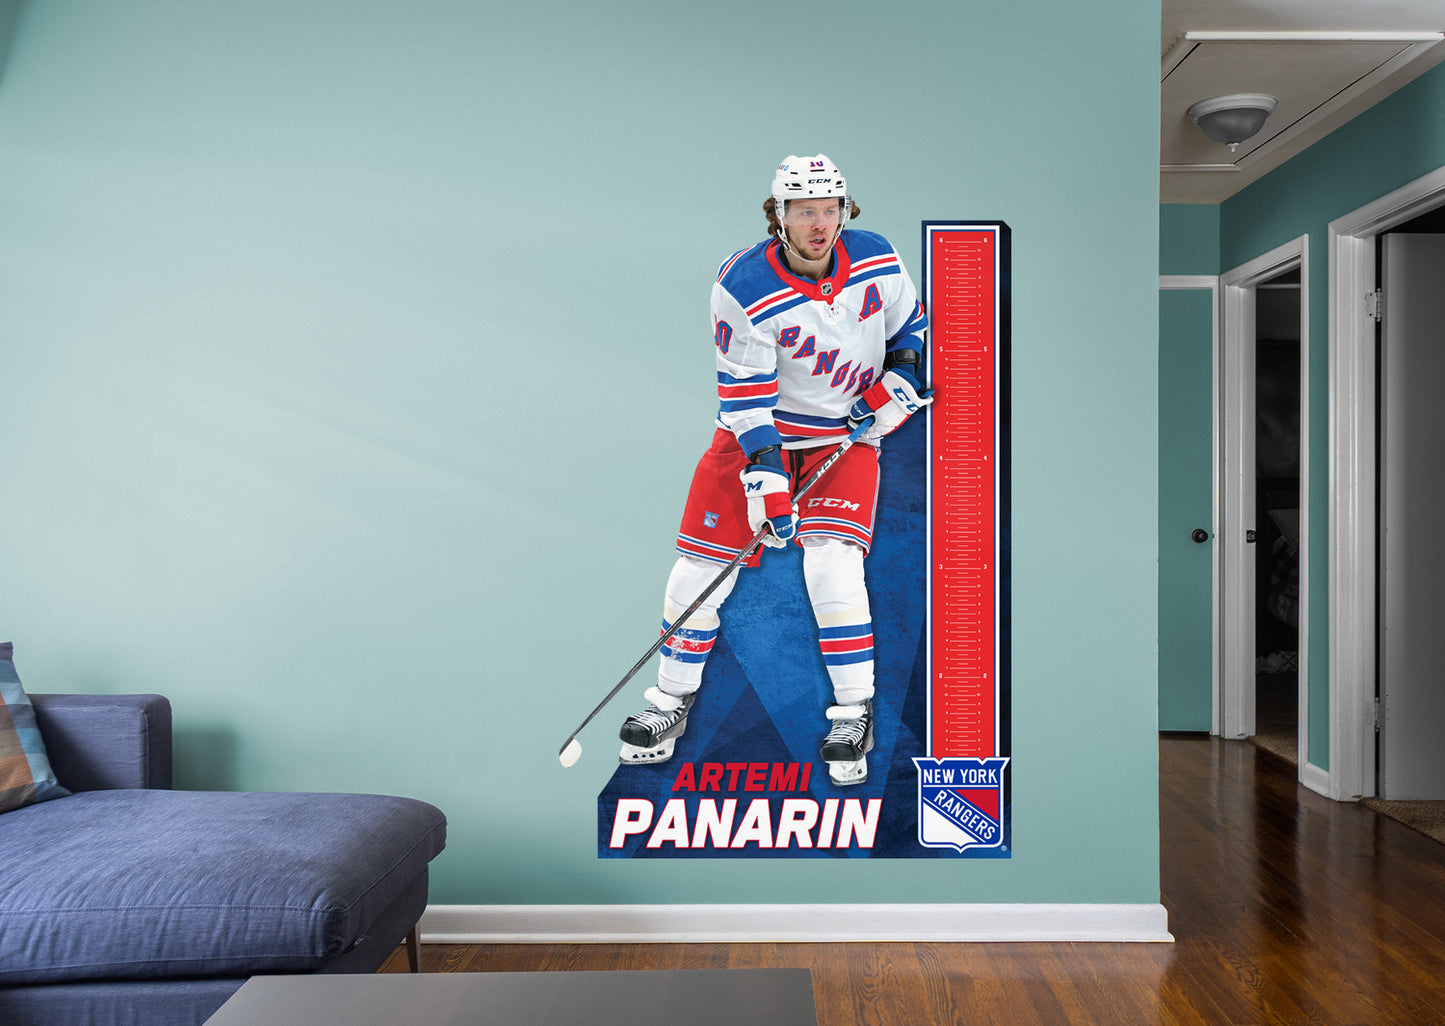 New York Rangers: Artemi Panarin  Growth Chart        - Officially Licensed NHL Removable Wall   Adhesive Decal